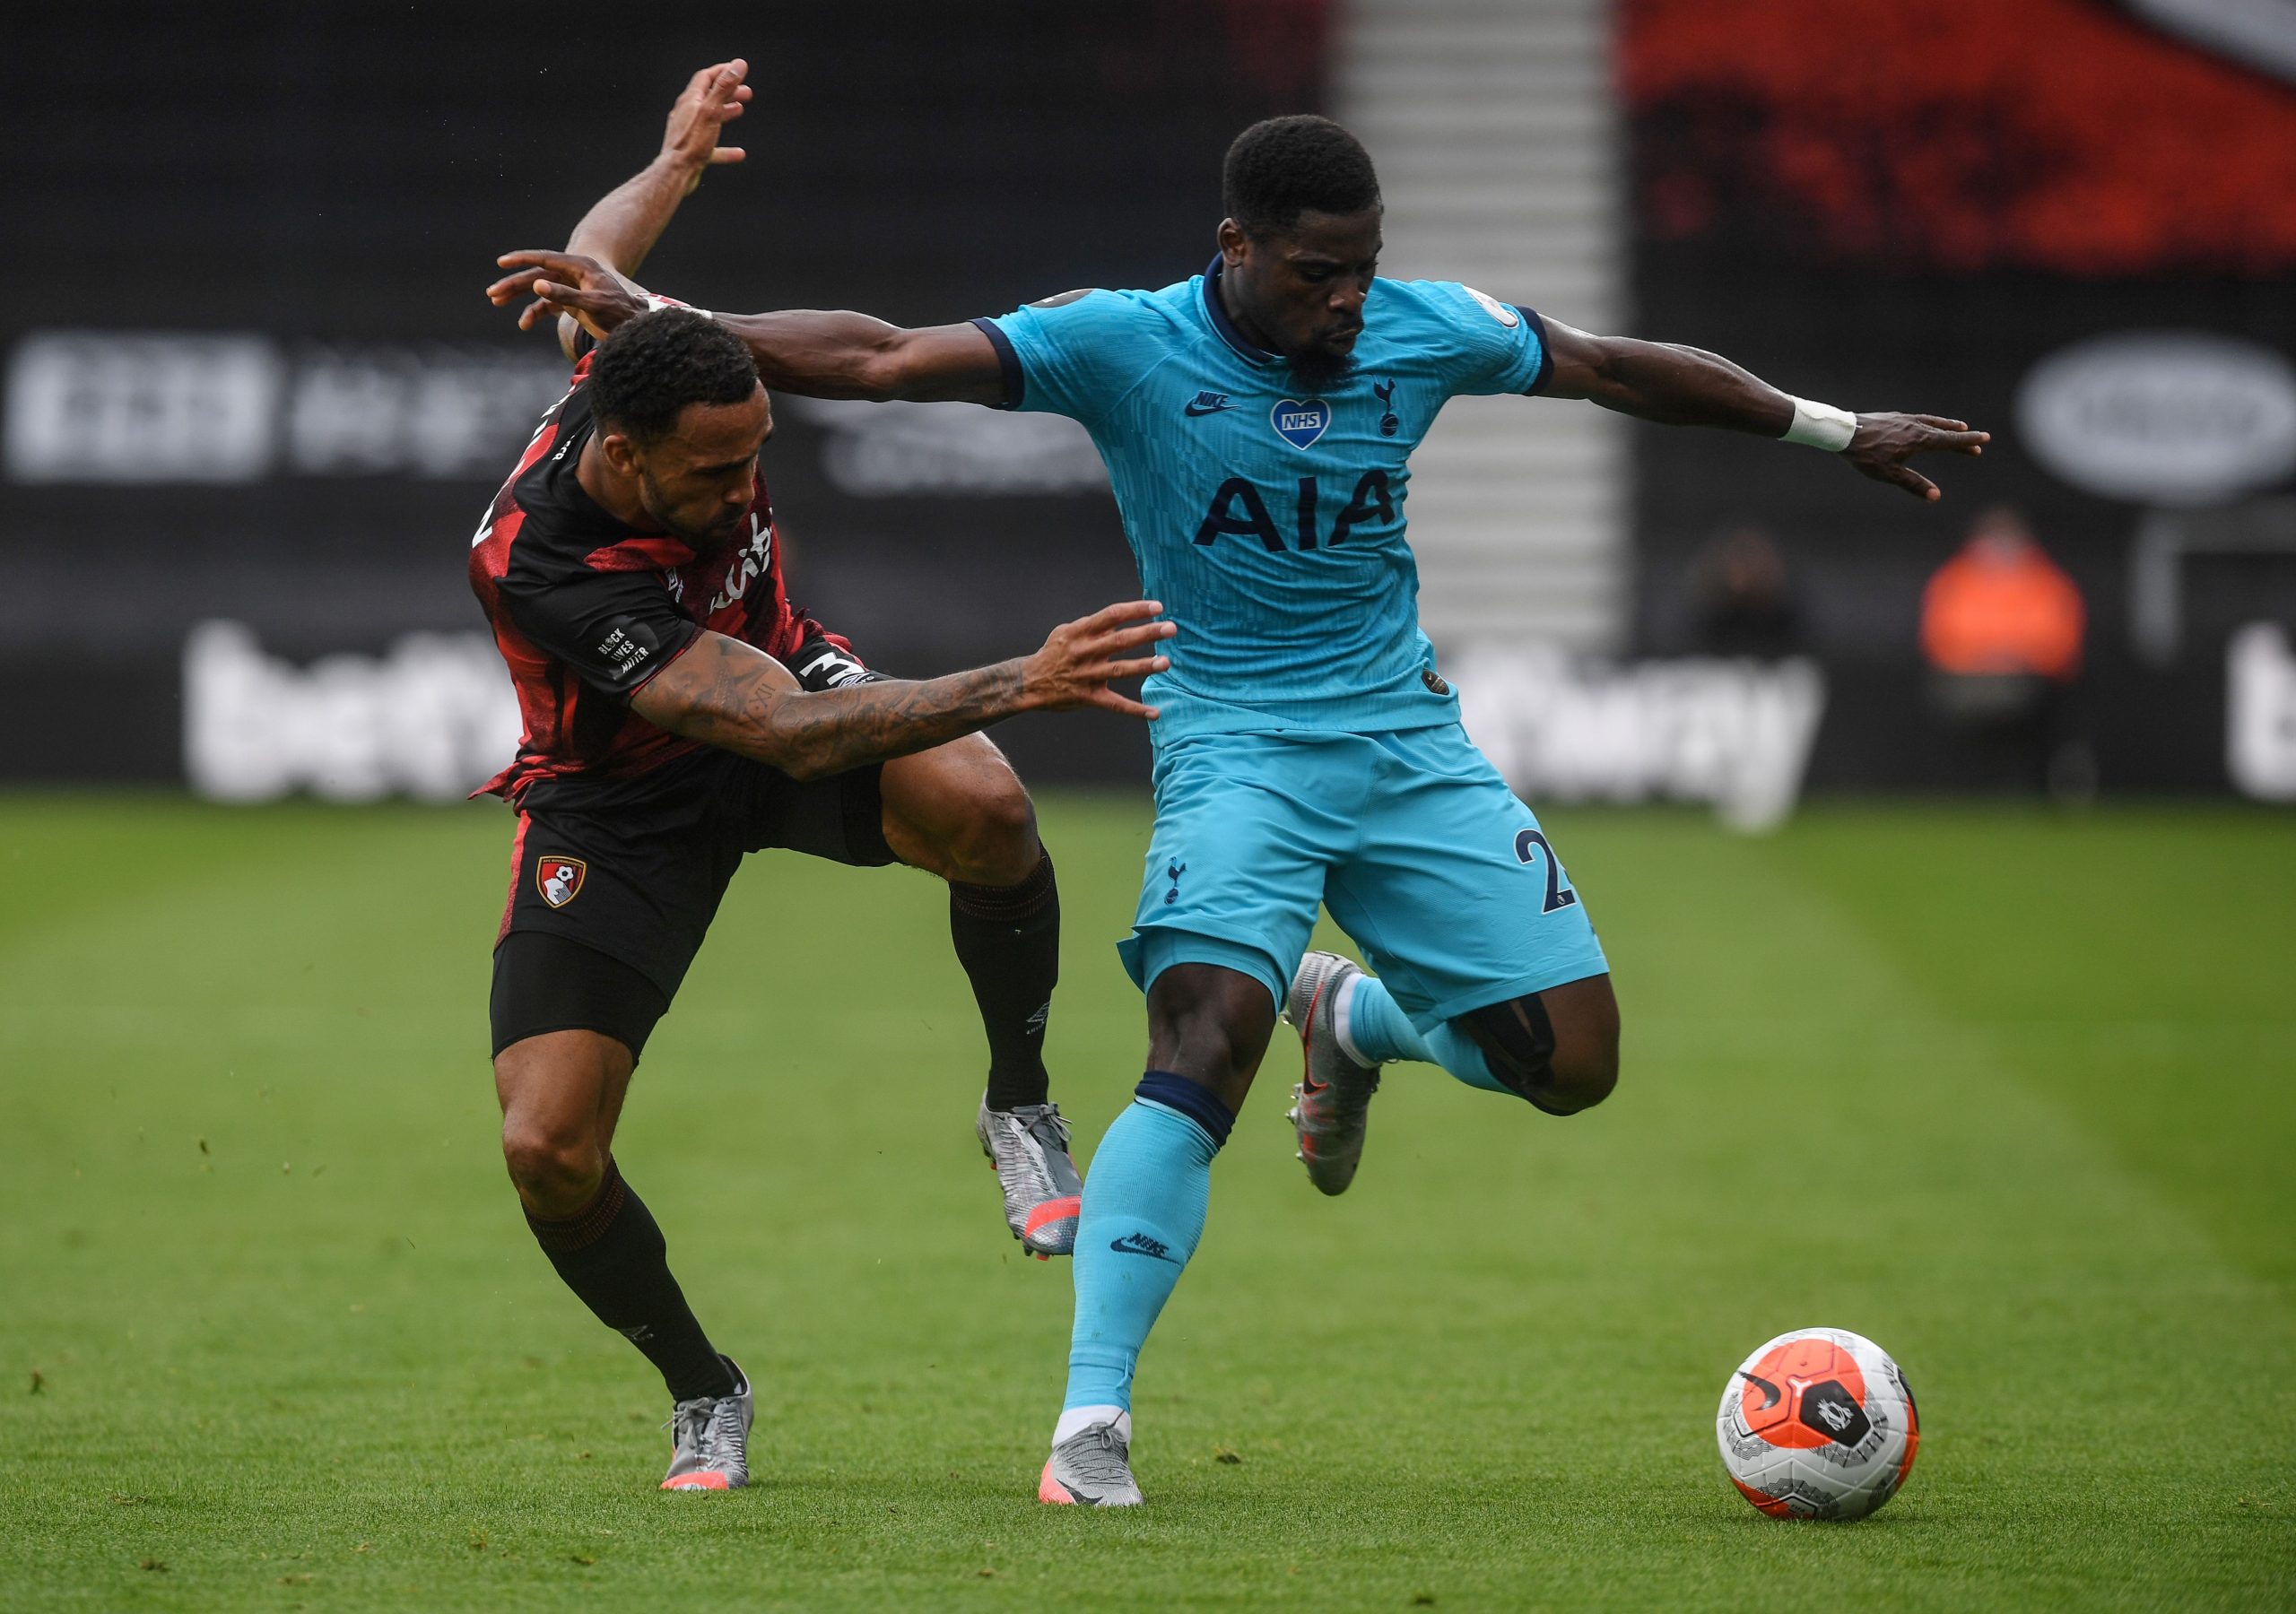 Wolves keeping a keen eye on Tottenham Hotspur's Serge Aurier who is in action in the picture